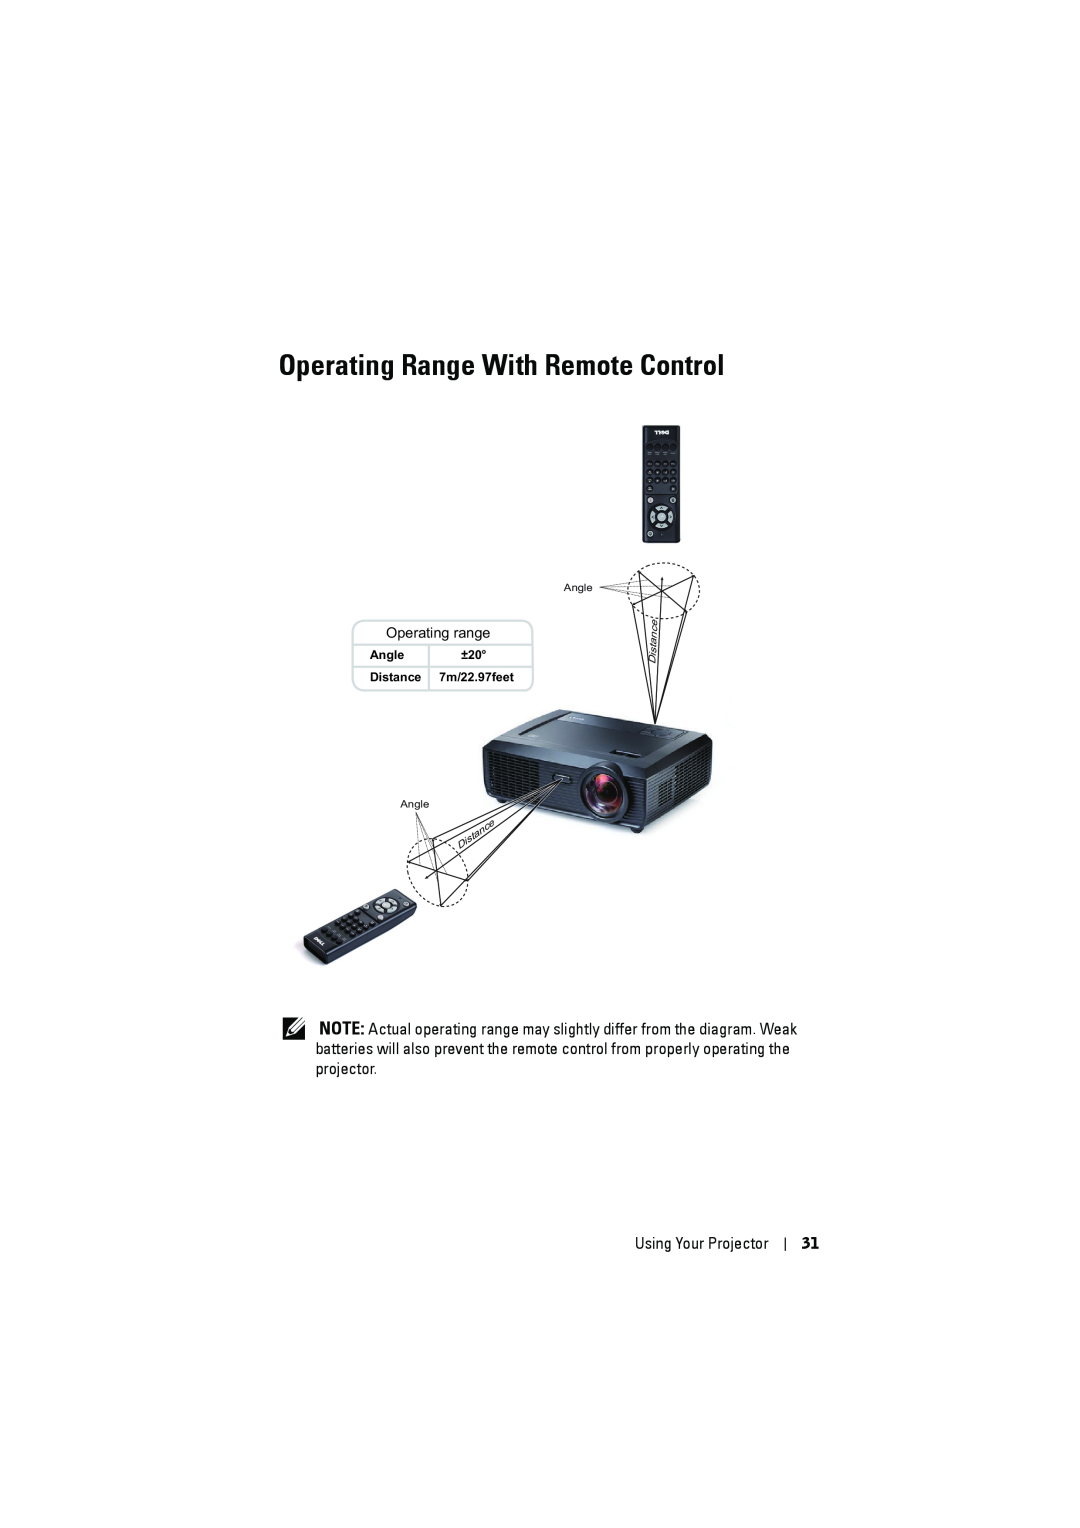 Dell S300 Operating Range With Remote Control, Using Your Projector, Operating range, Angle ±20 Distance 7m/22.97feet 